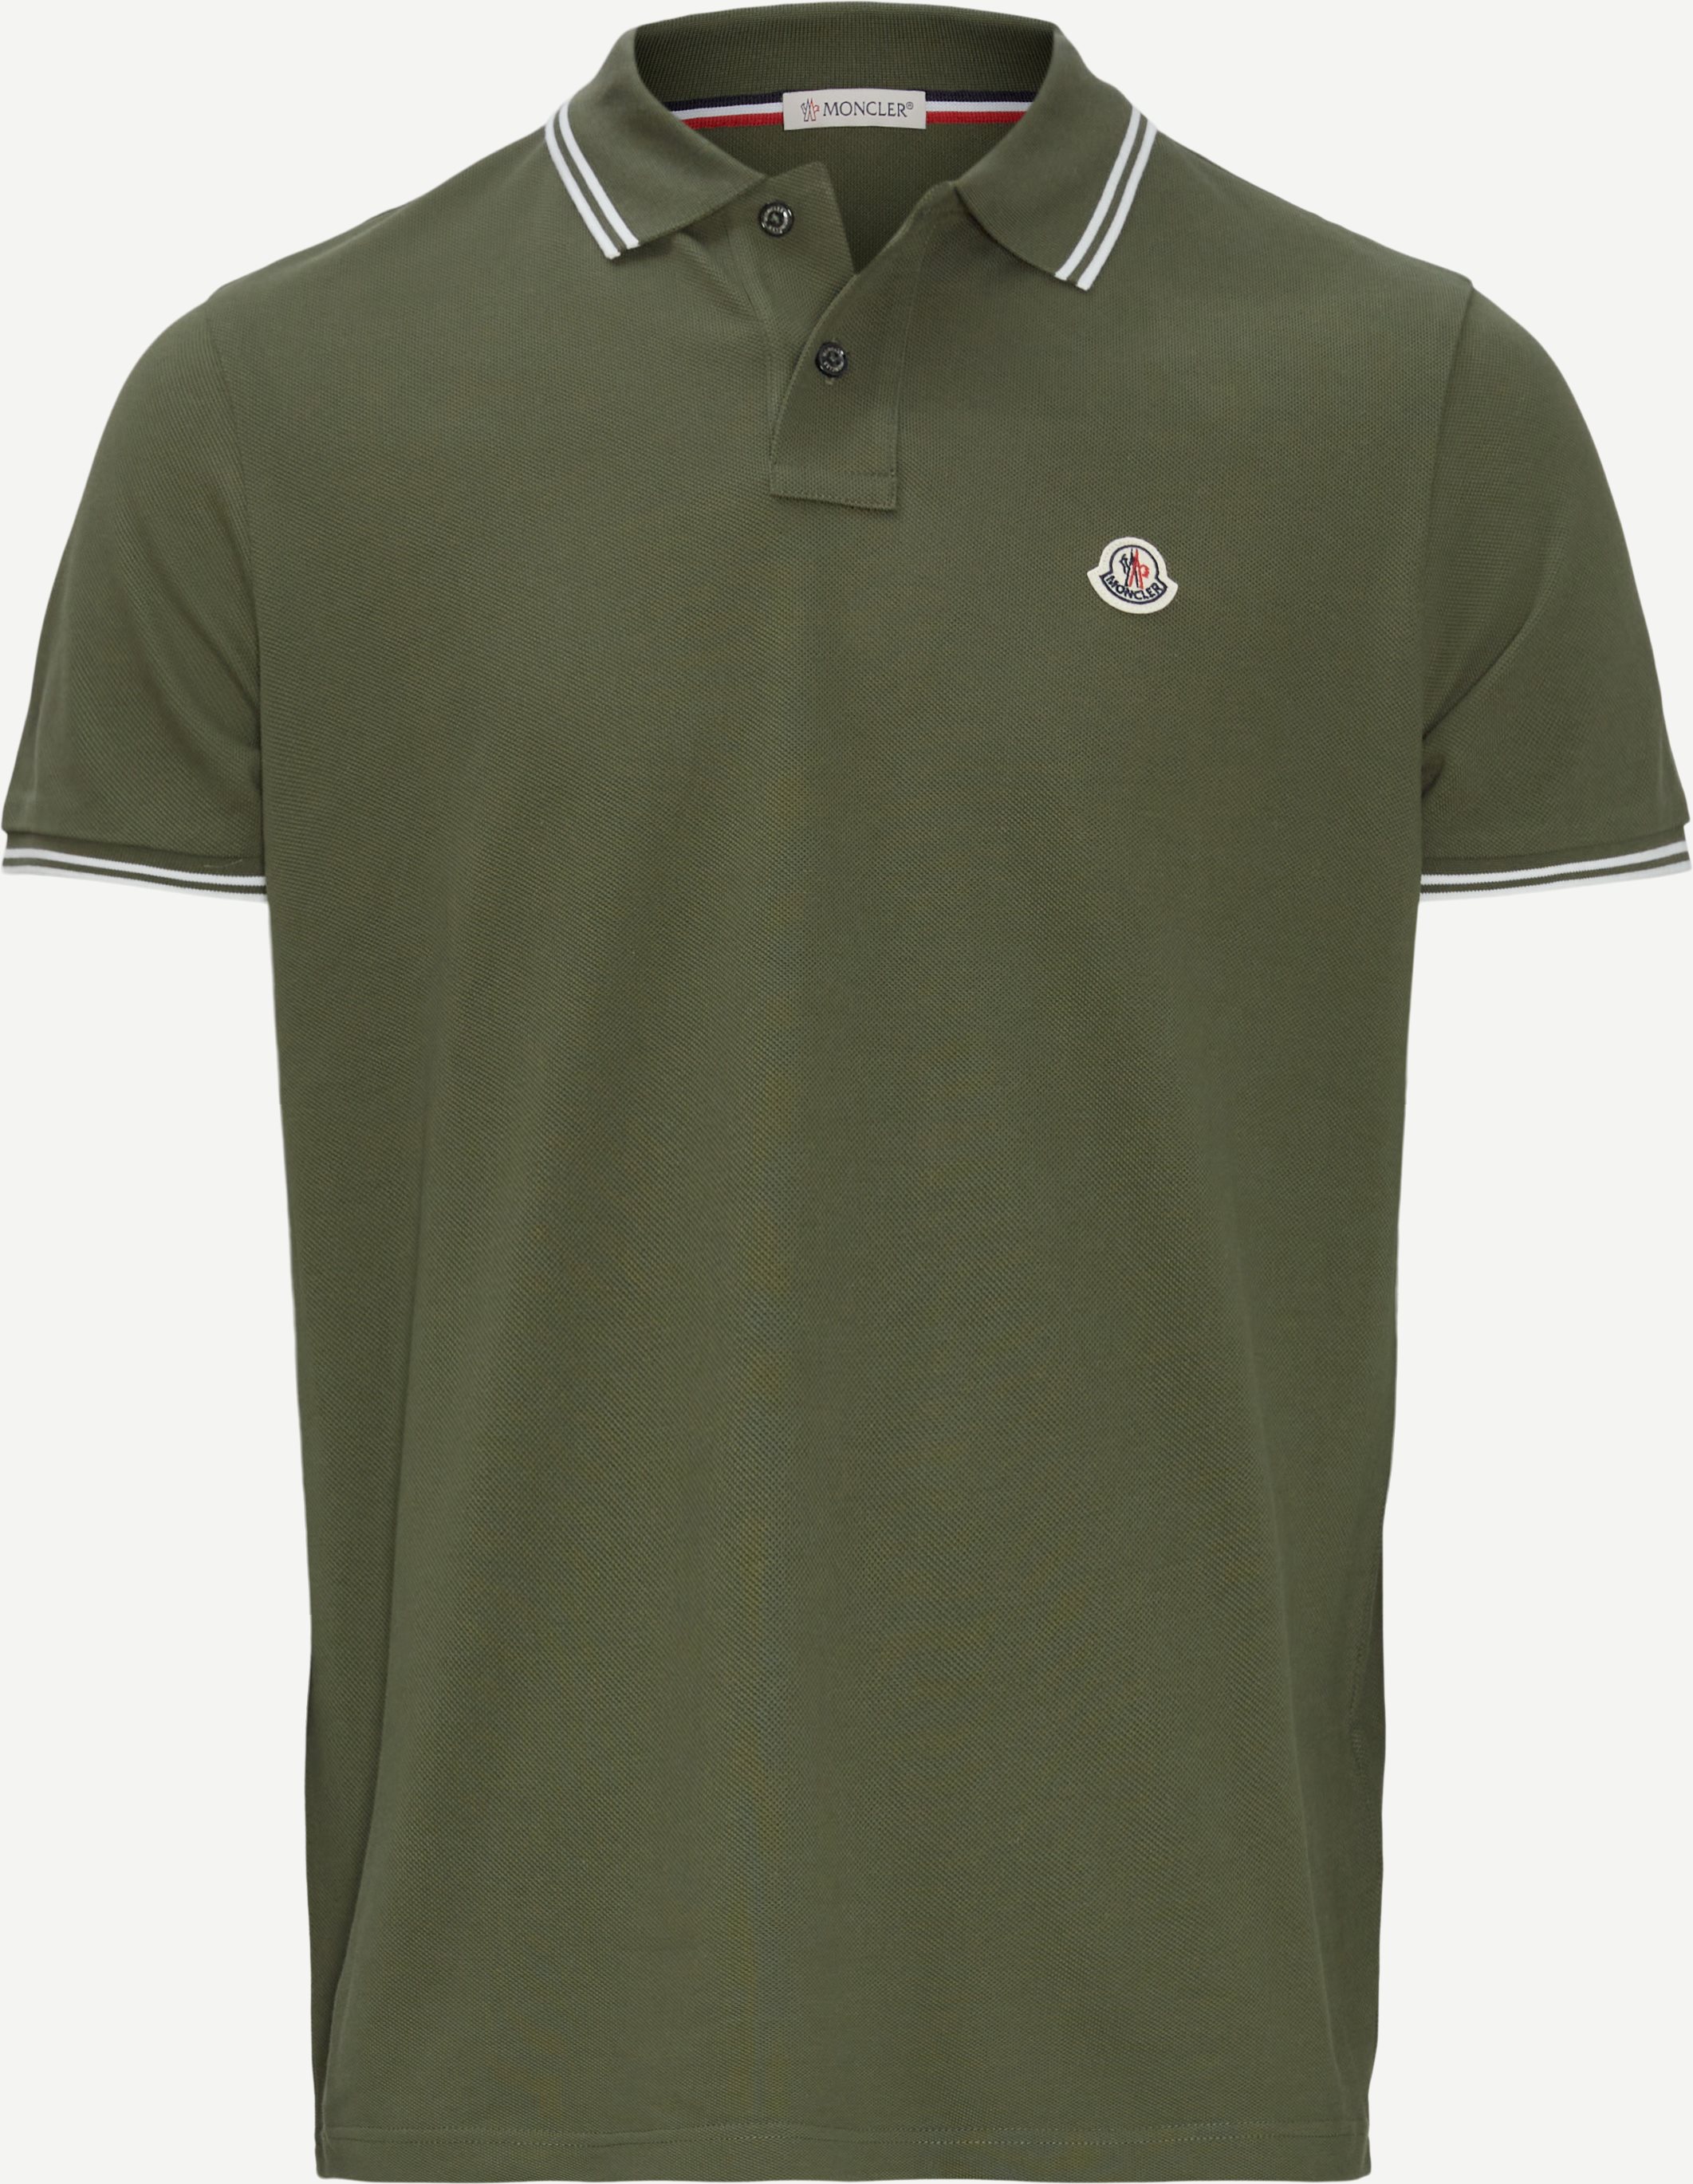 Maglia Polo - T-shirts - Regular fit - Army